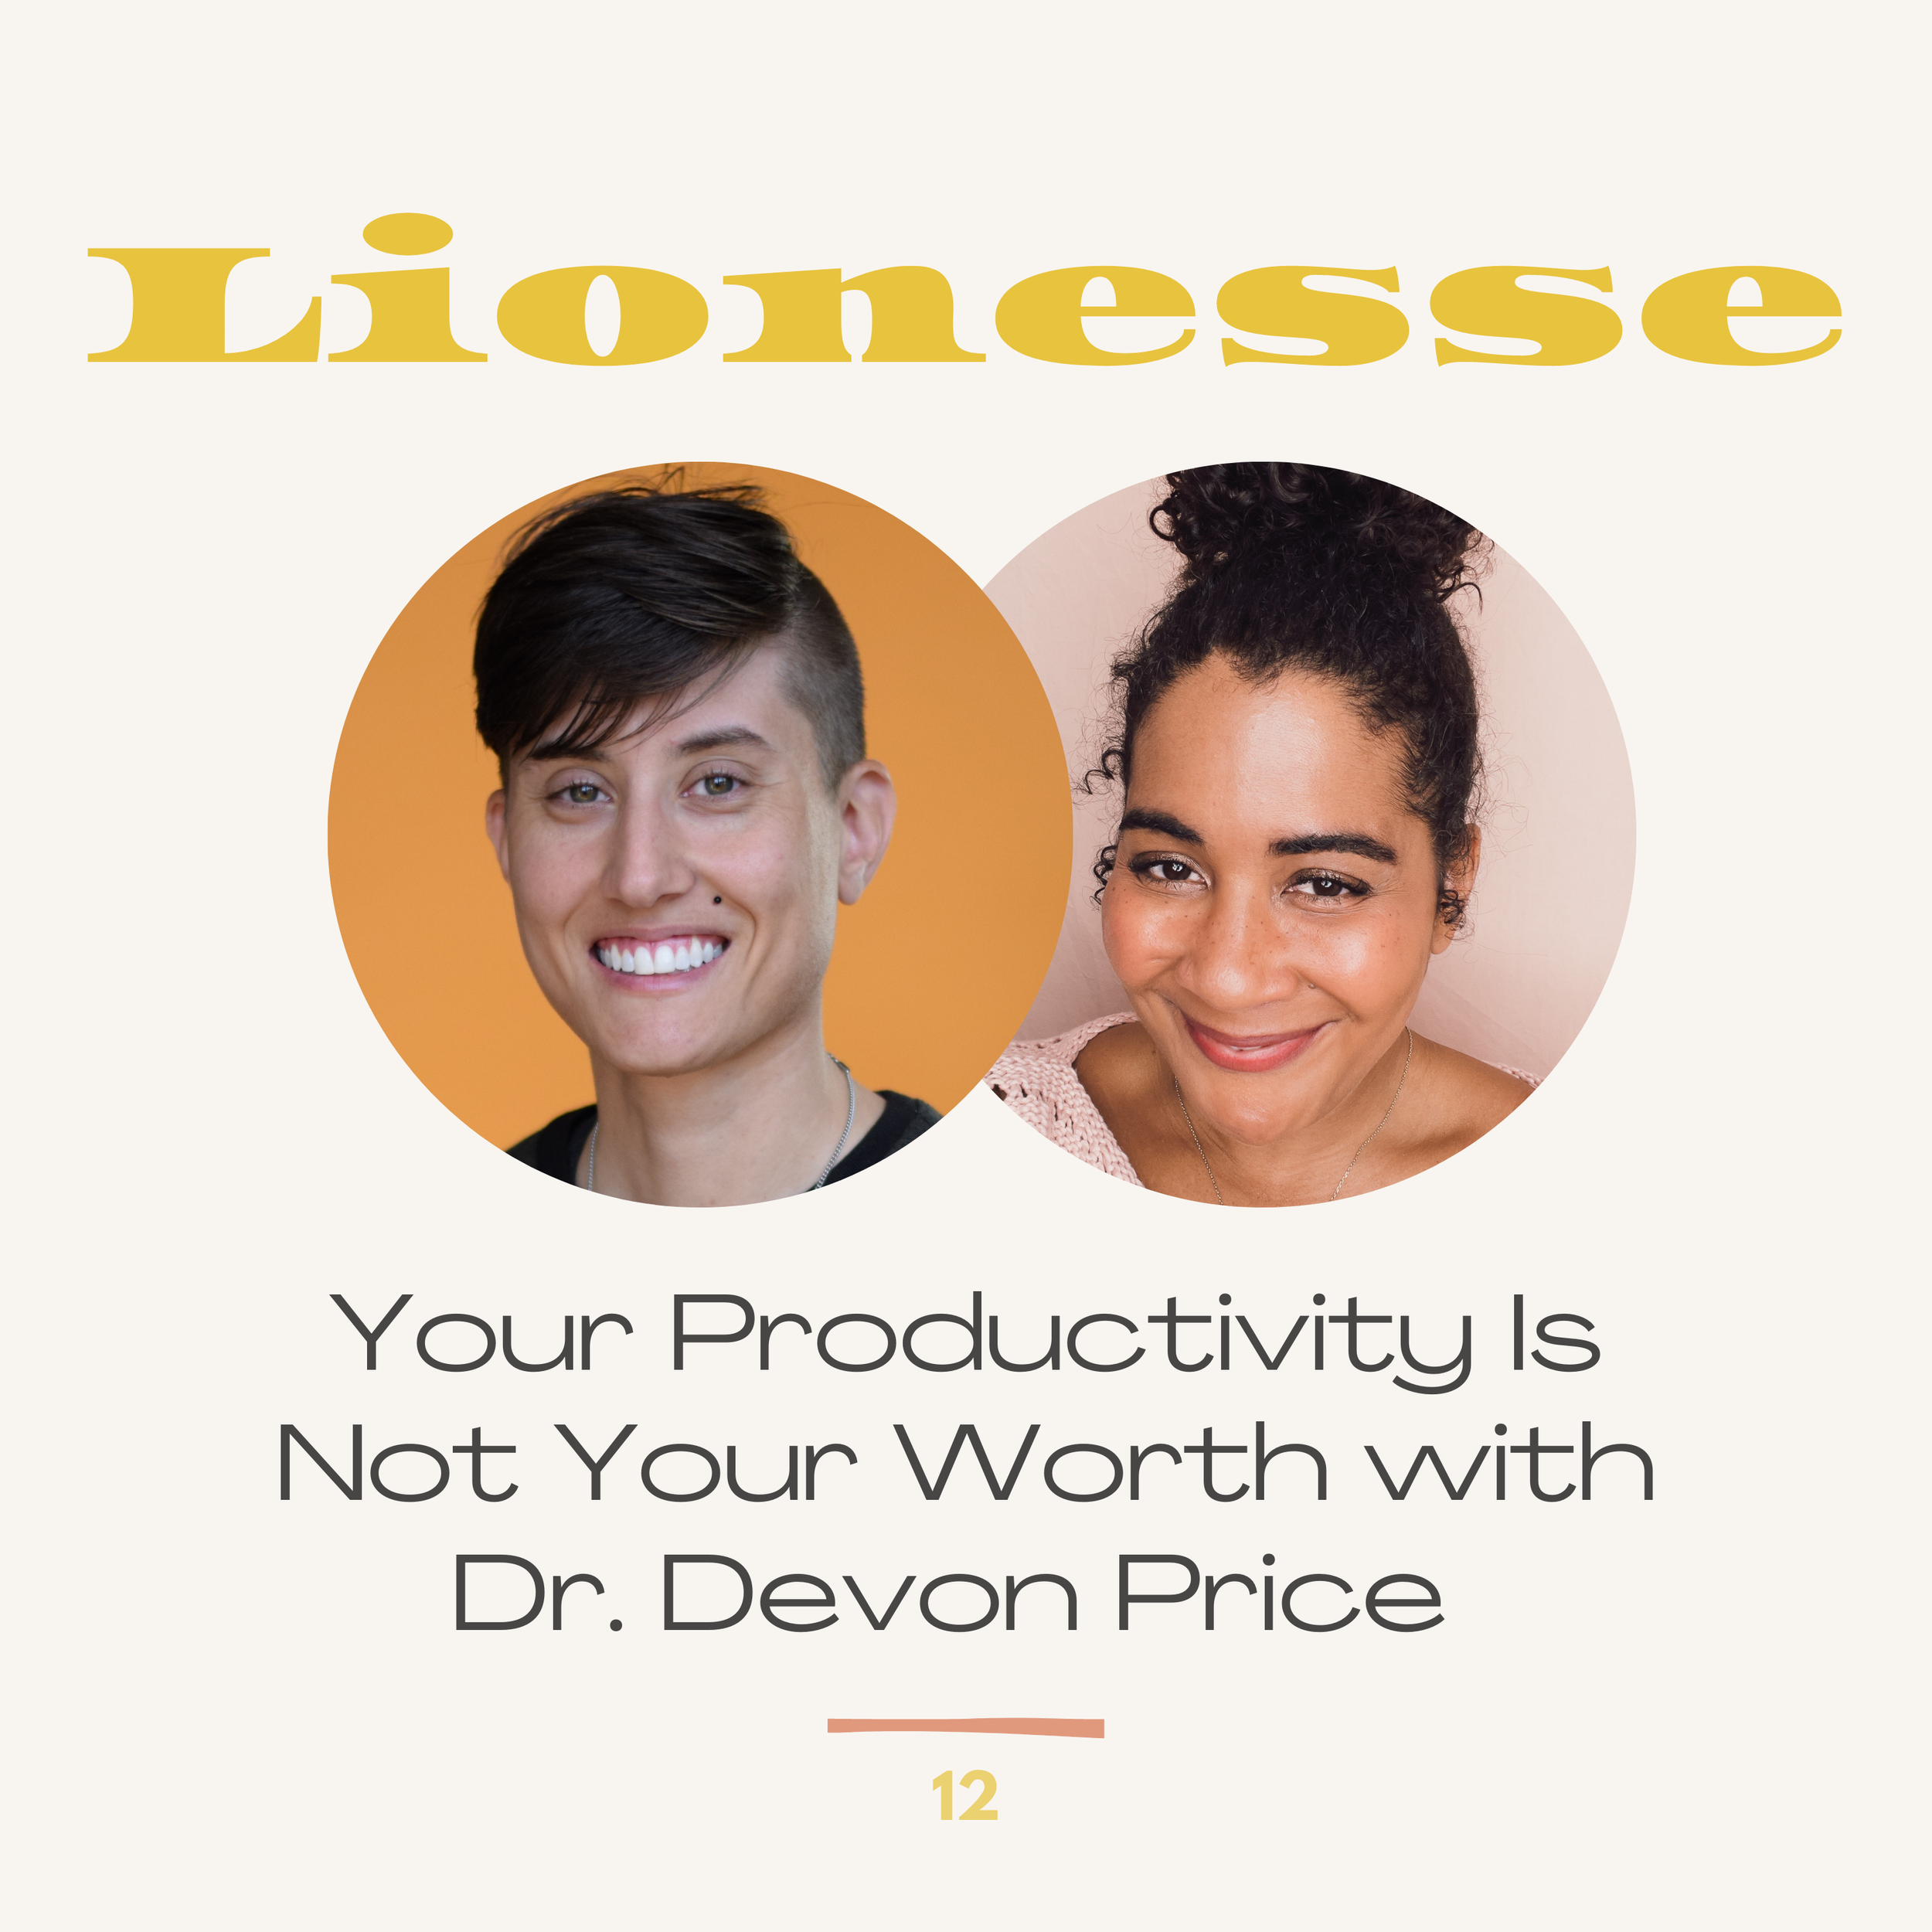 Your Productivity Is Not Your Worth with Dr. Devon Price — Lionesse